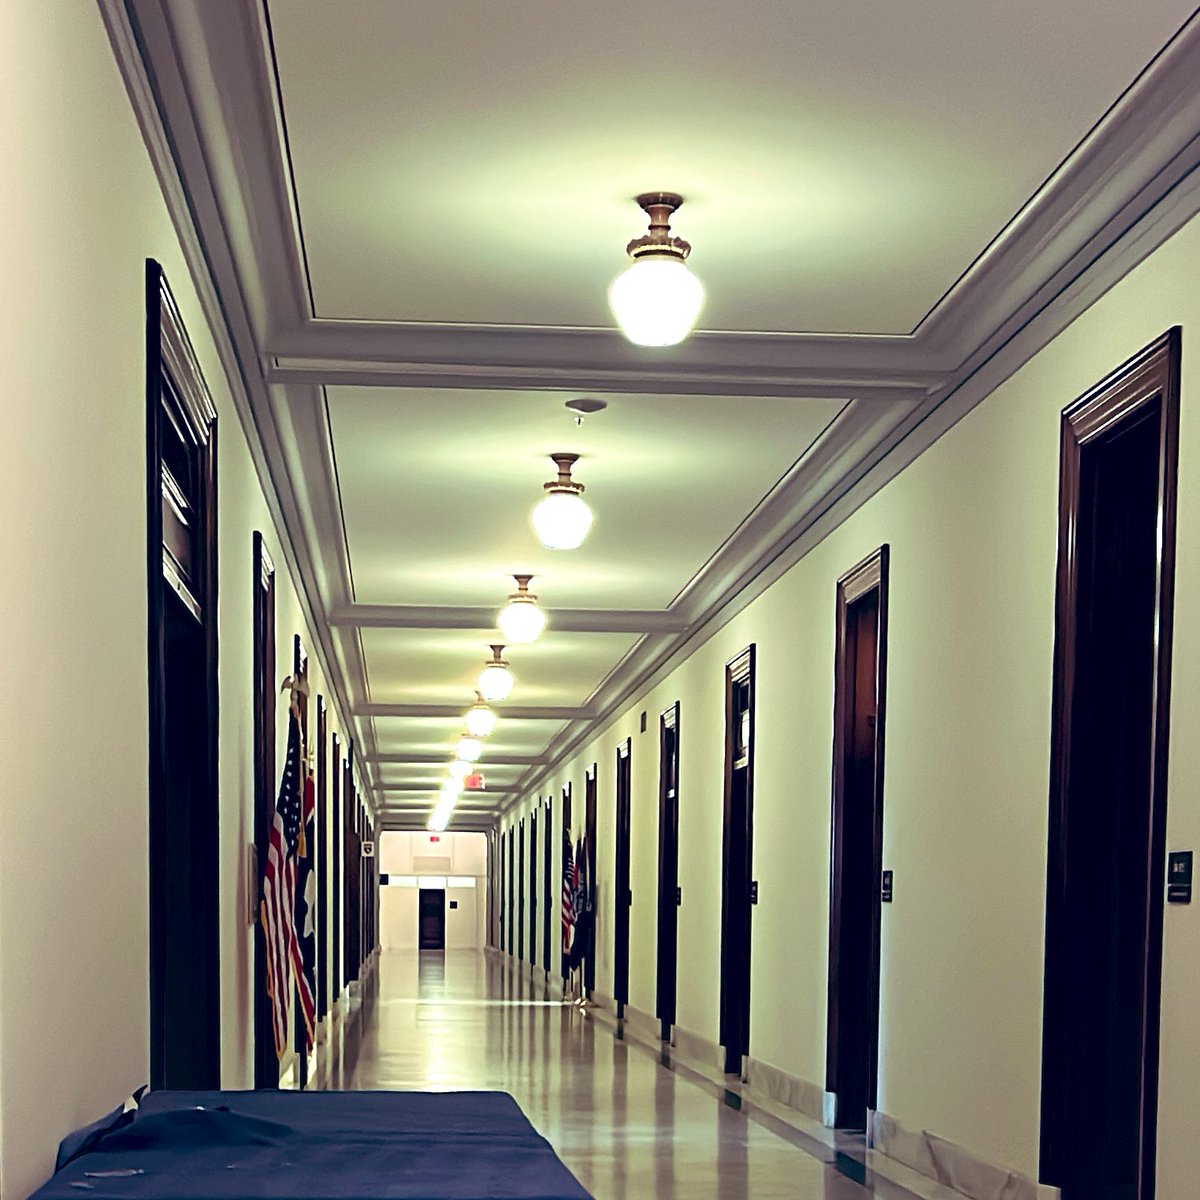 Today, #KidneyAdvocates are on Capitol Hill! @KidneyPatients & @ASNKidney are urging Congress to accelerate innovation through @Kidney_X and to support #Veterans with #KidneyDisease via increased funding to VA Kidney Health Program & DoD CDMRP!